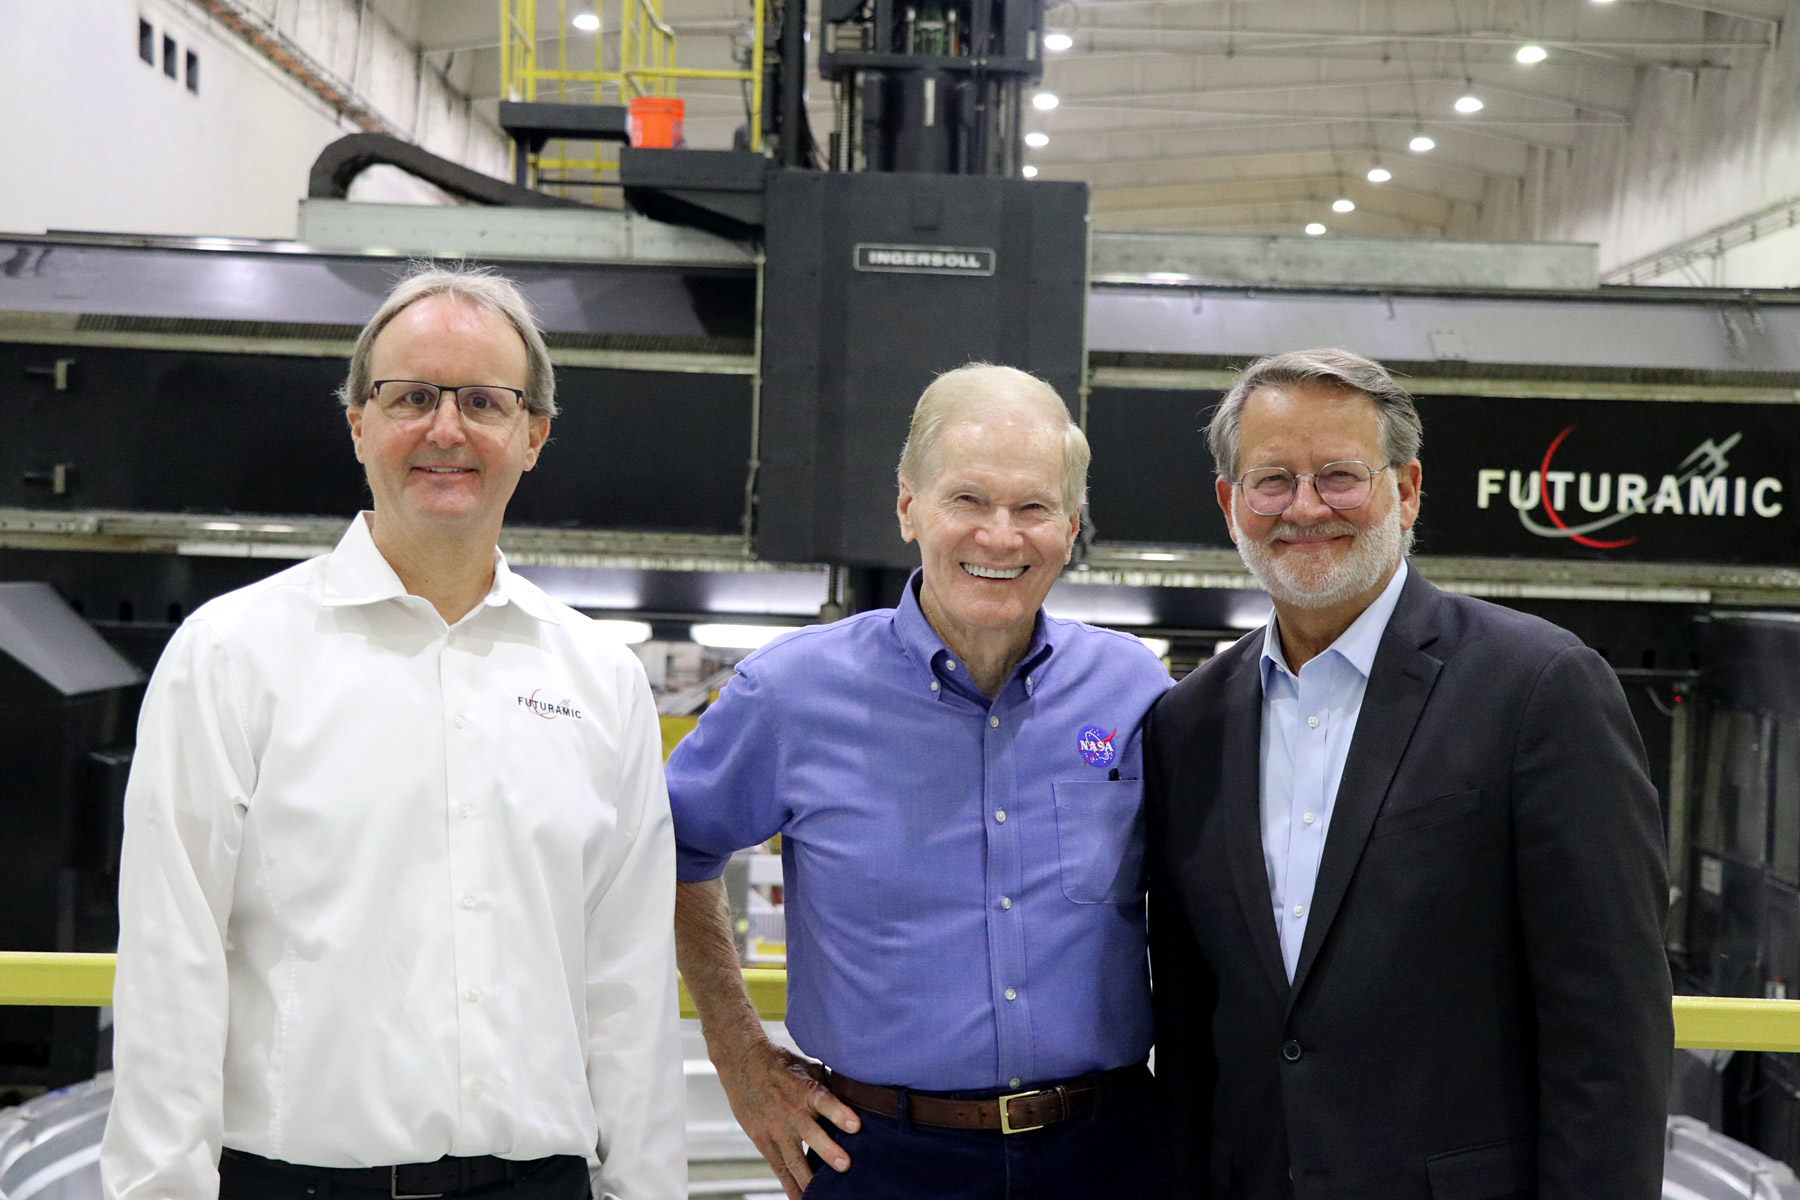 Featured image for “Senator Peters and NASA Administrator Bill Nelson Visit Futuramic to Showcase Michigan’s Aerospace Manufacturing Excellence”